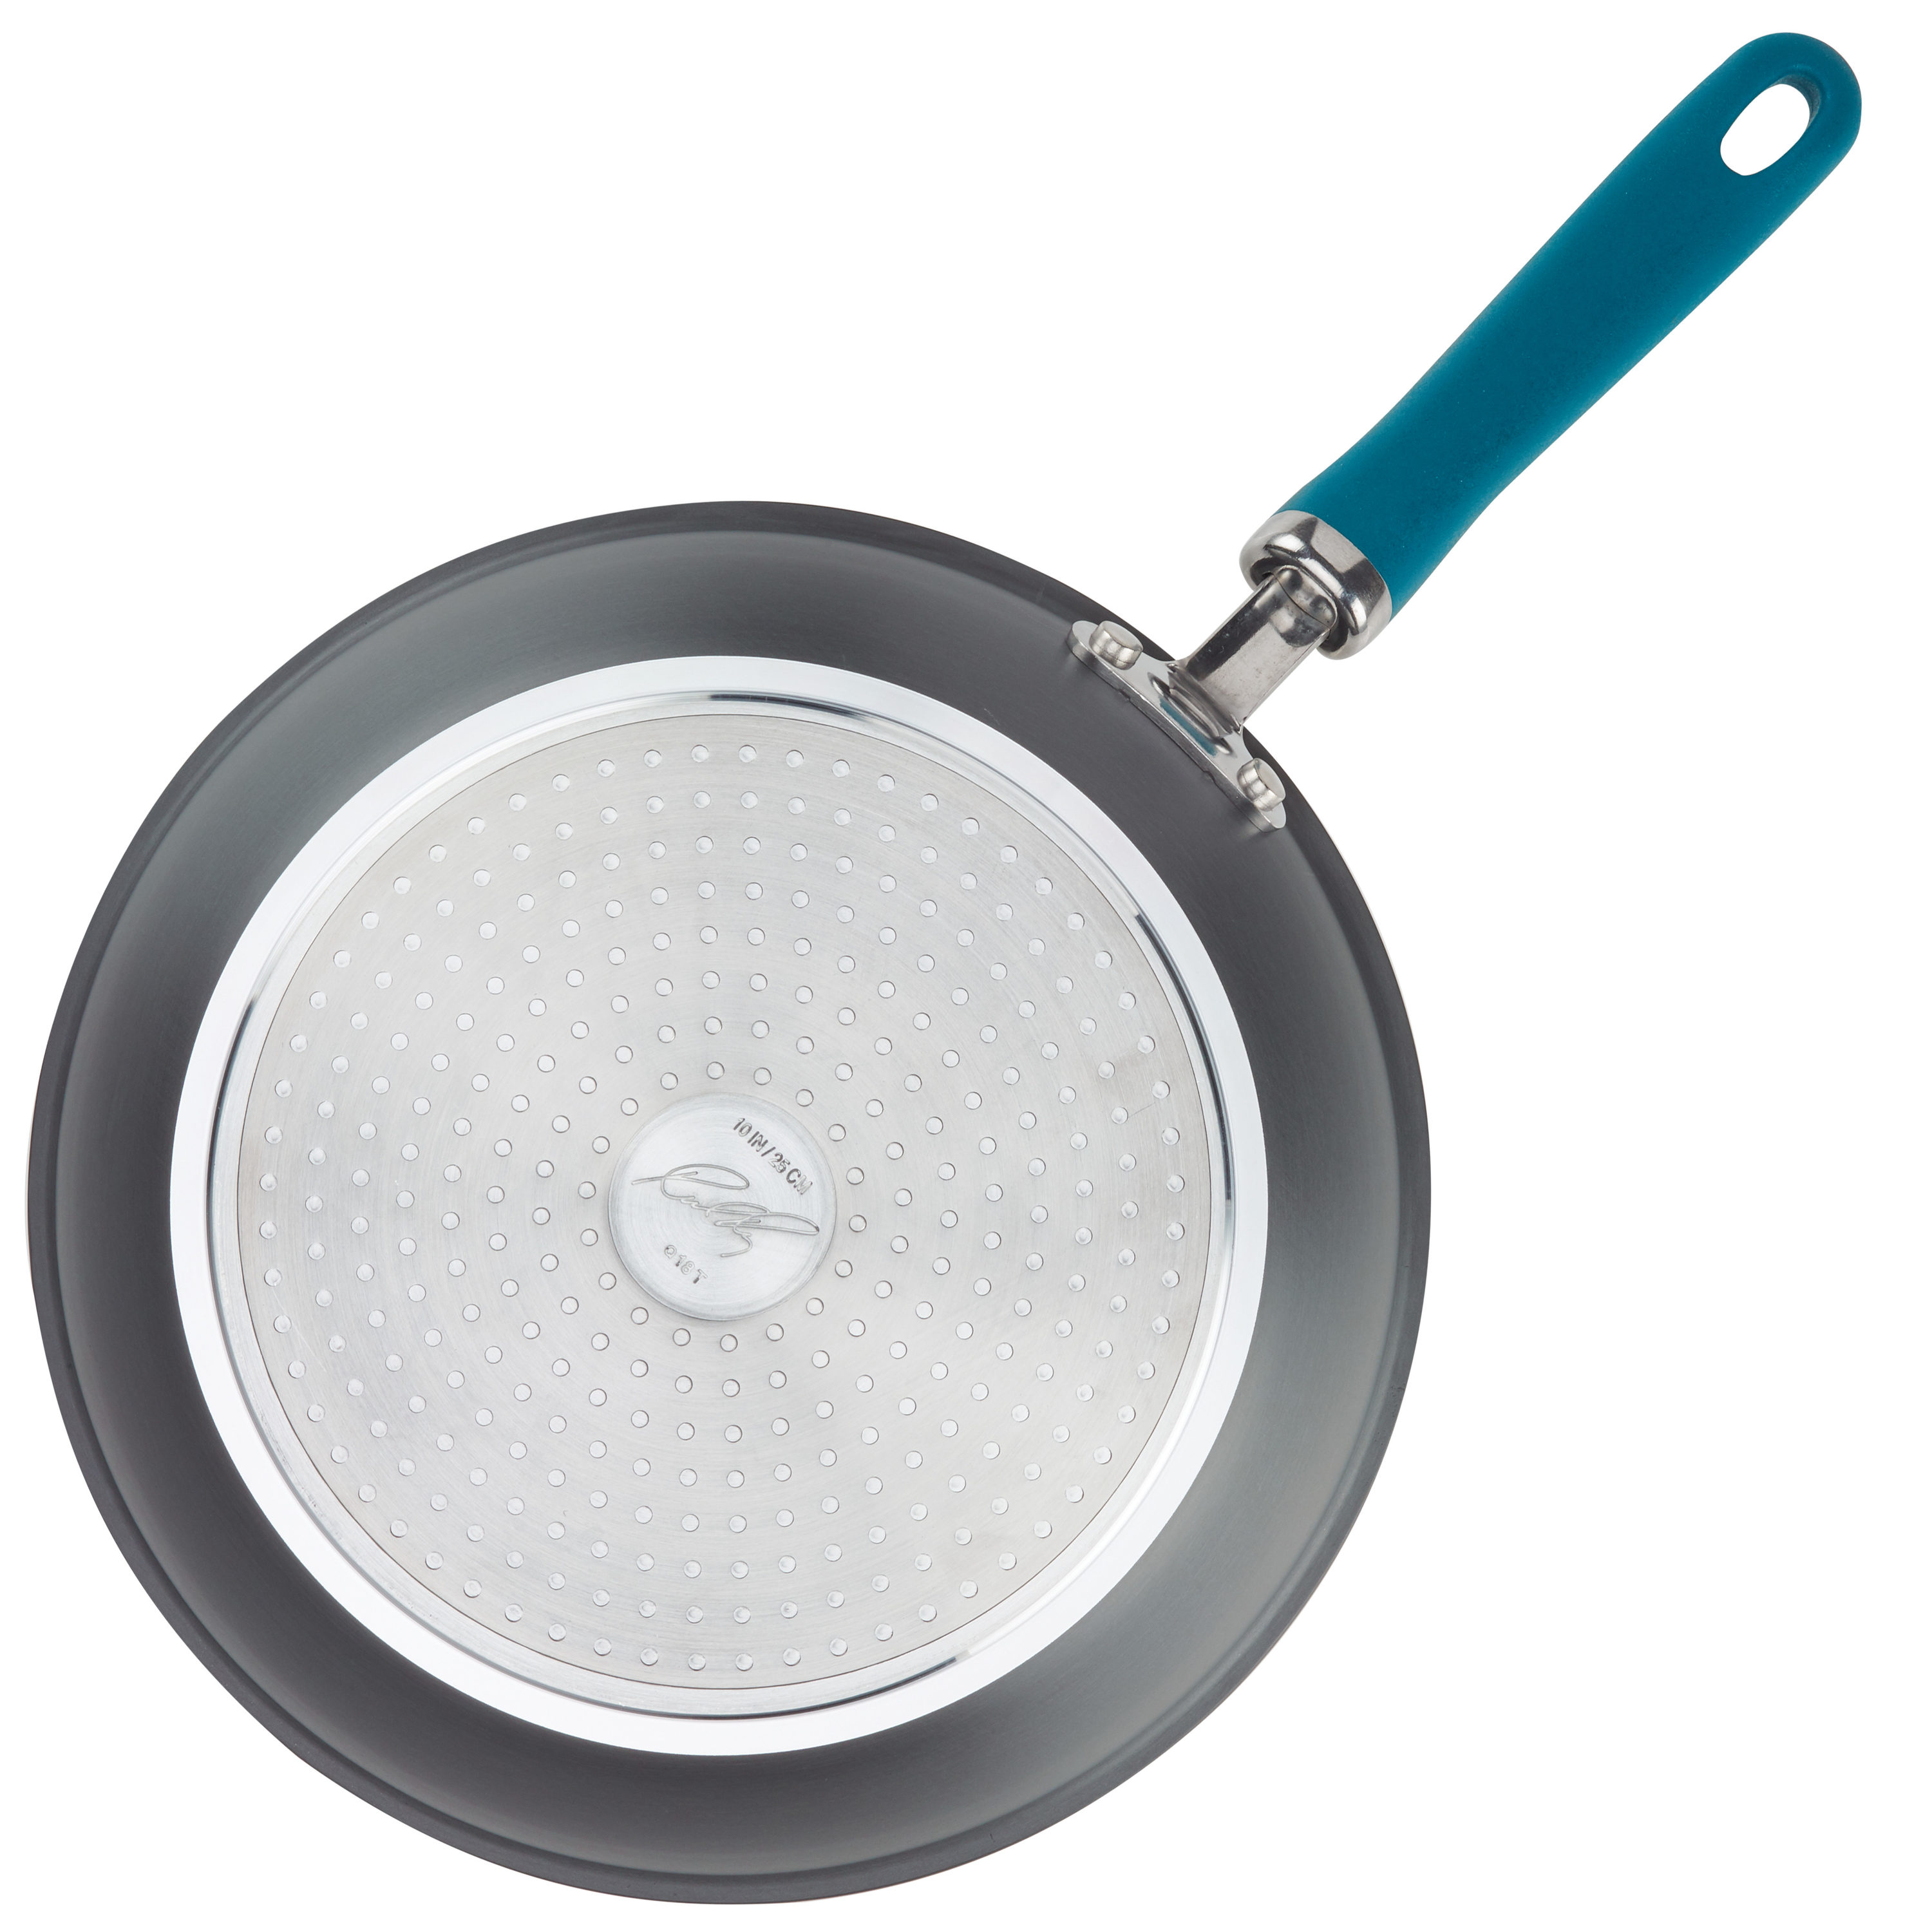 Rachael Ray Cook + Create Hard Anodized Nonstick Frying Pan Set, 2